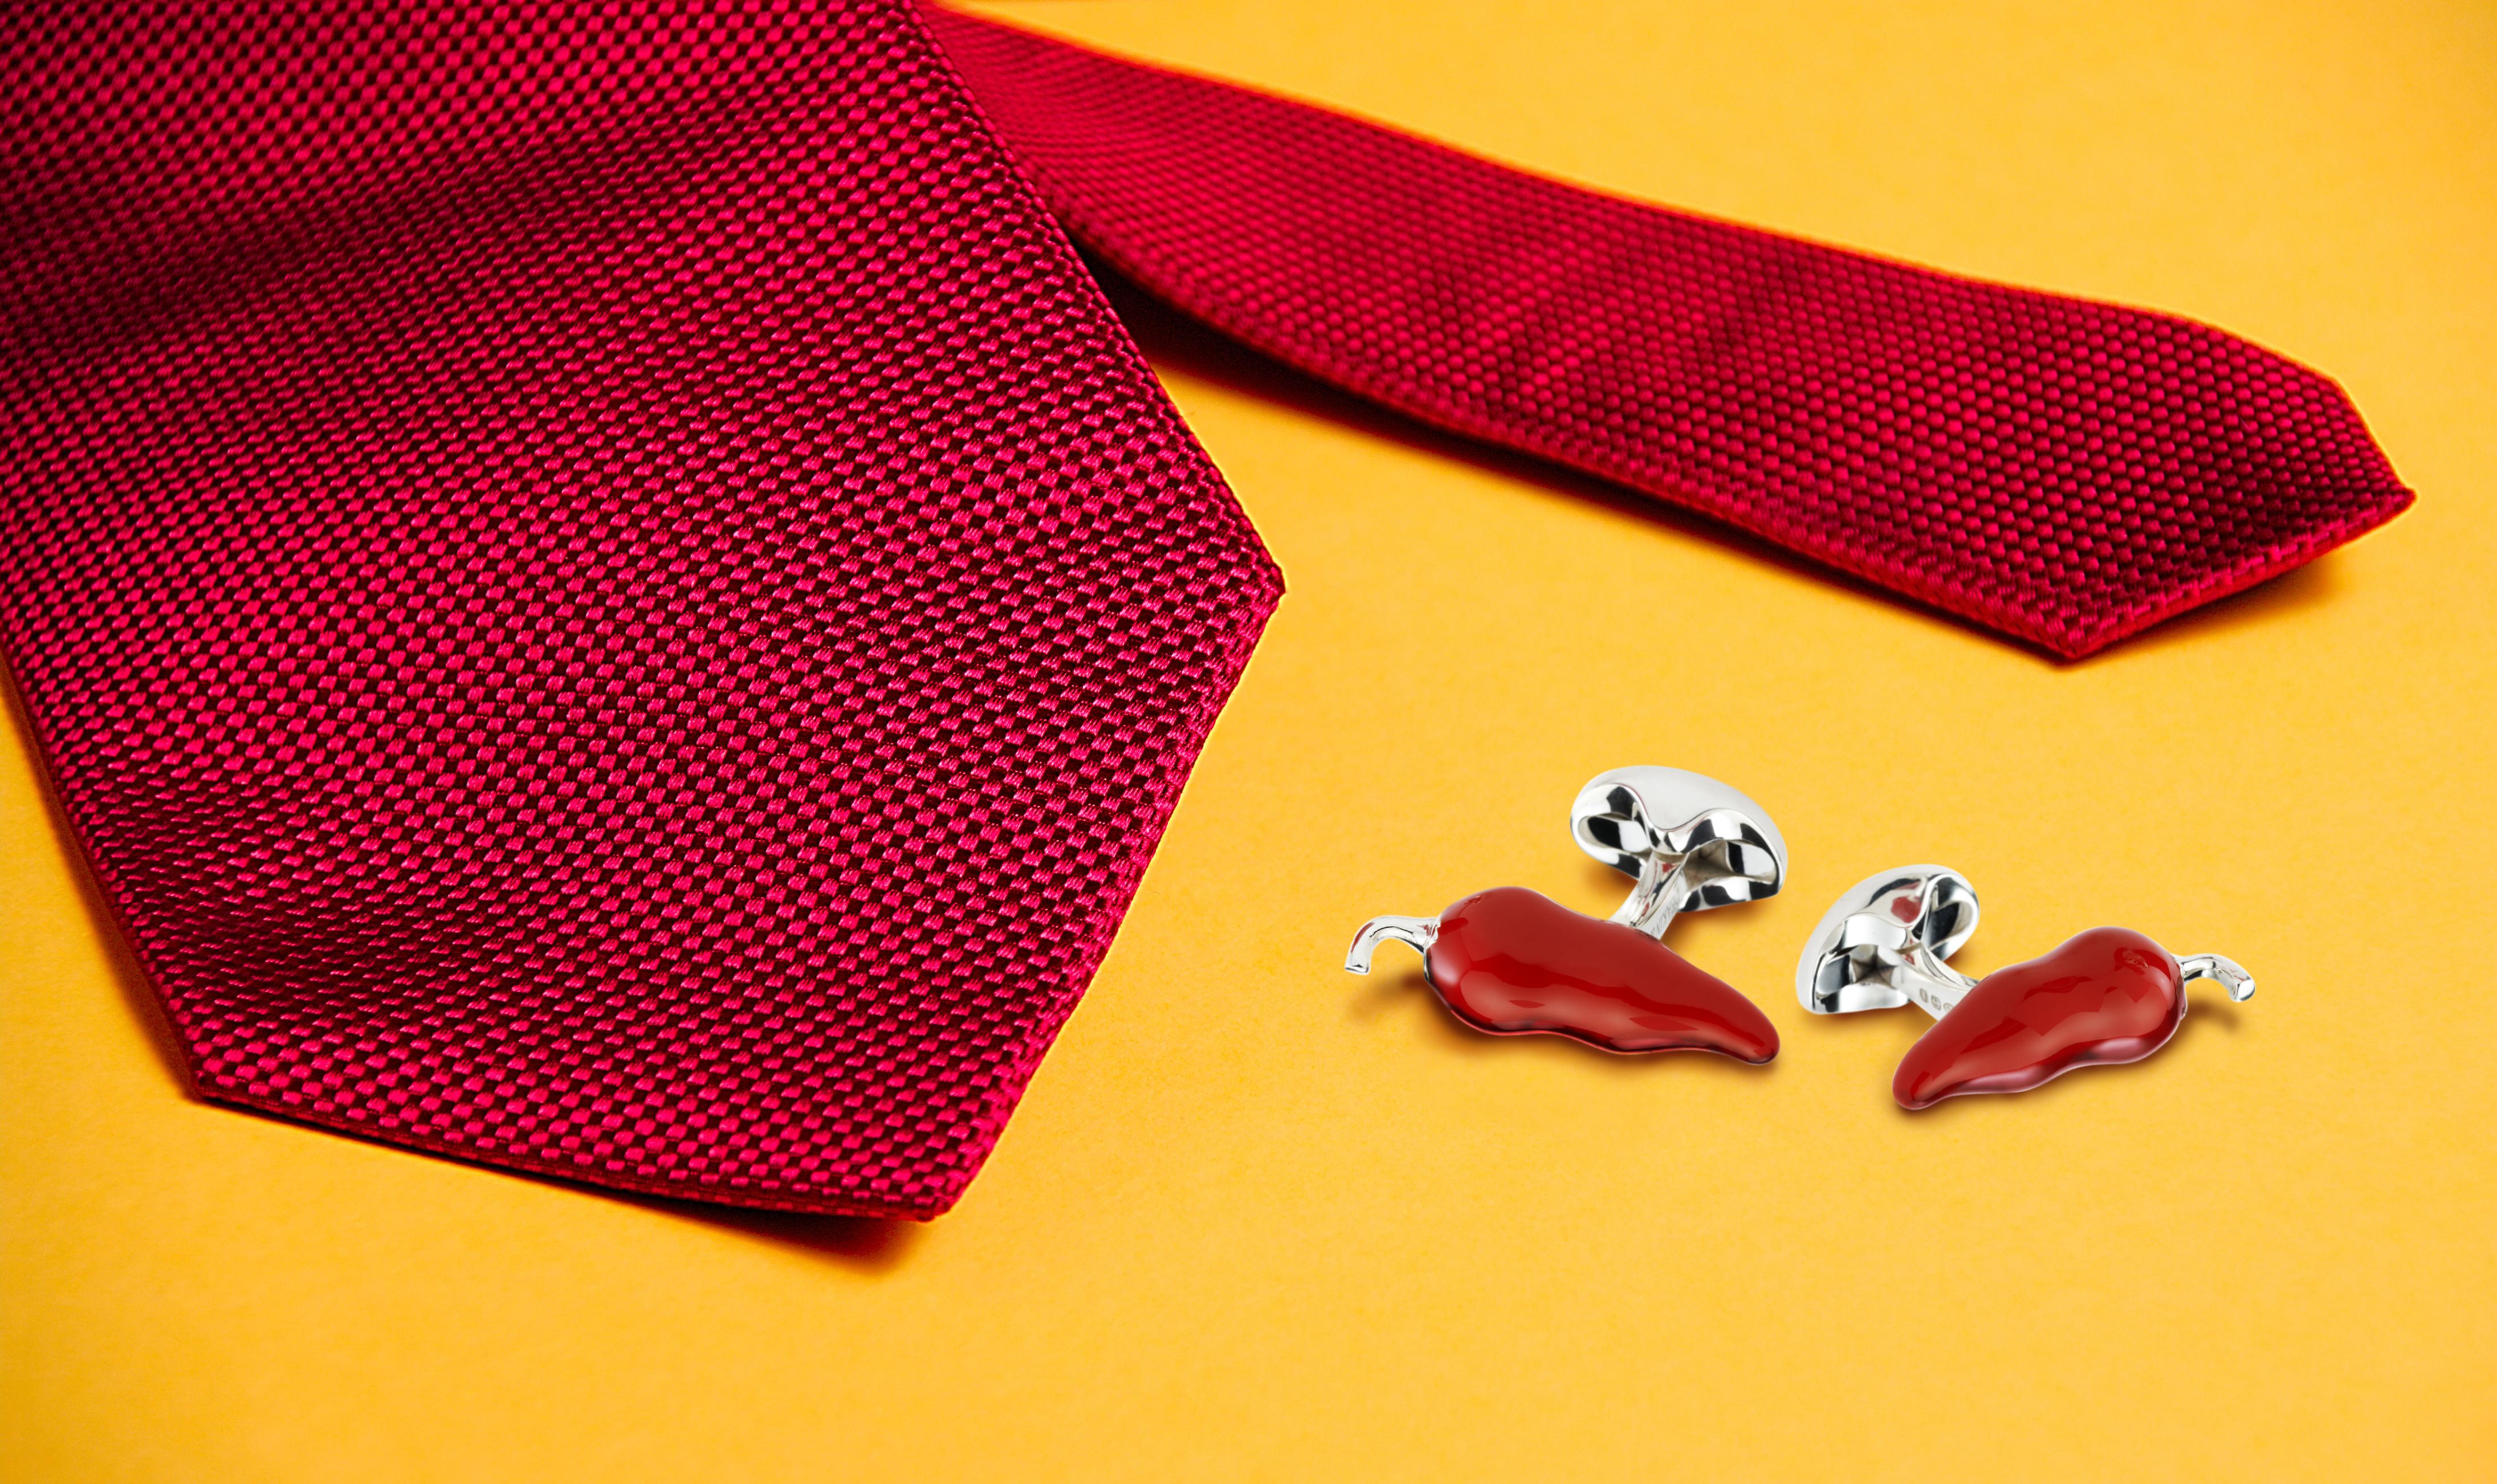 DEAKIN & FRANCIS, Piccadilly Arcade, London

Handle them with care. These hot chilli cufflinks are sure to spice up your cuffs! The perfect gift for foodies and chefs, or a delicious treat for your own collection.

Made from sterling silver and